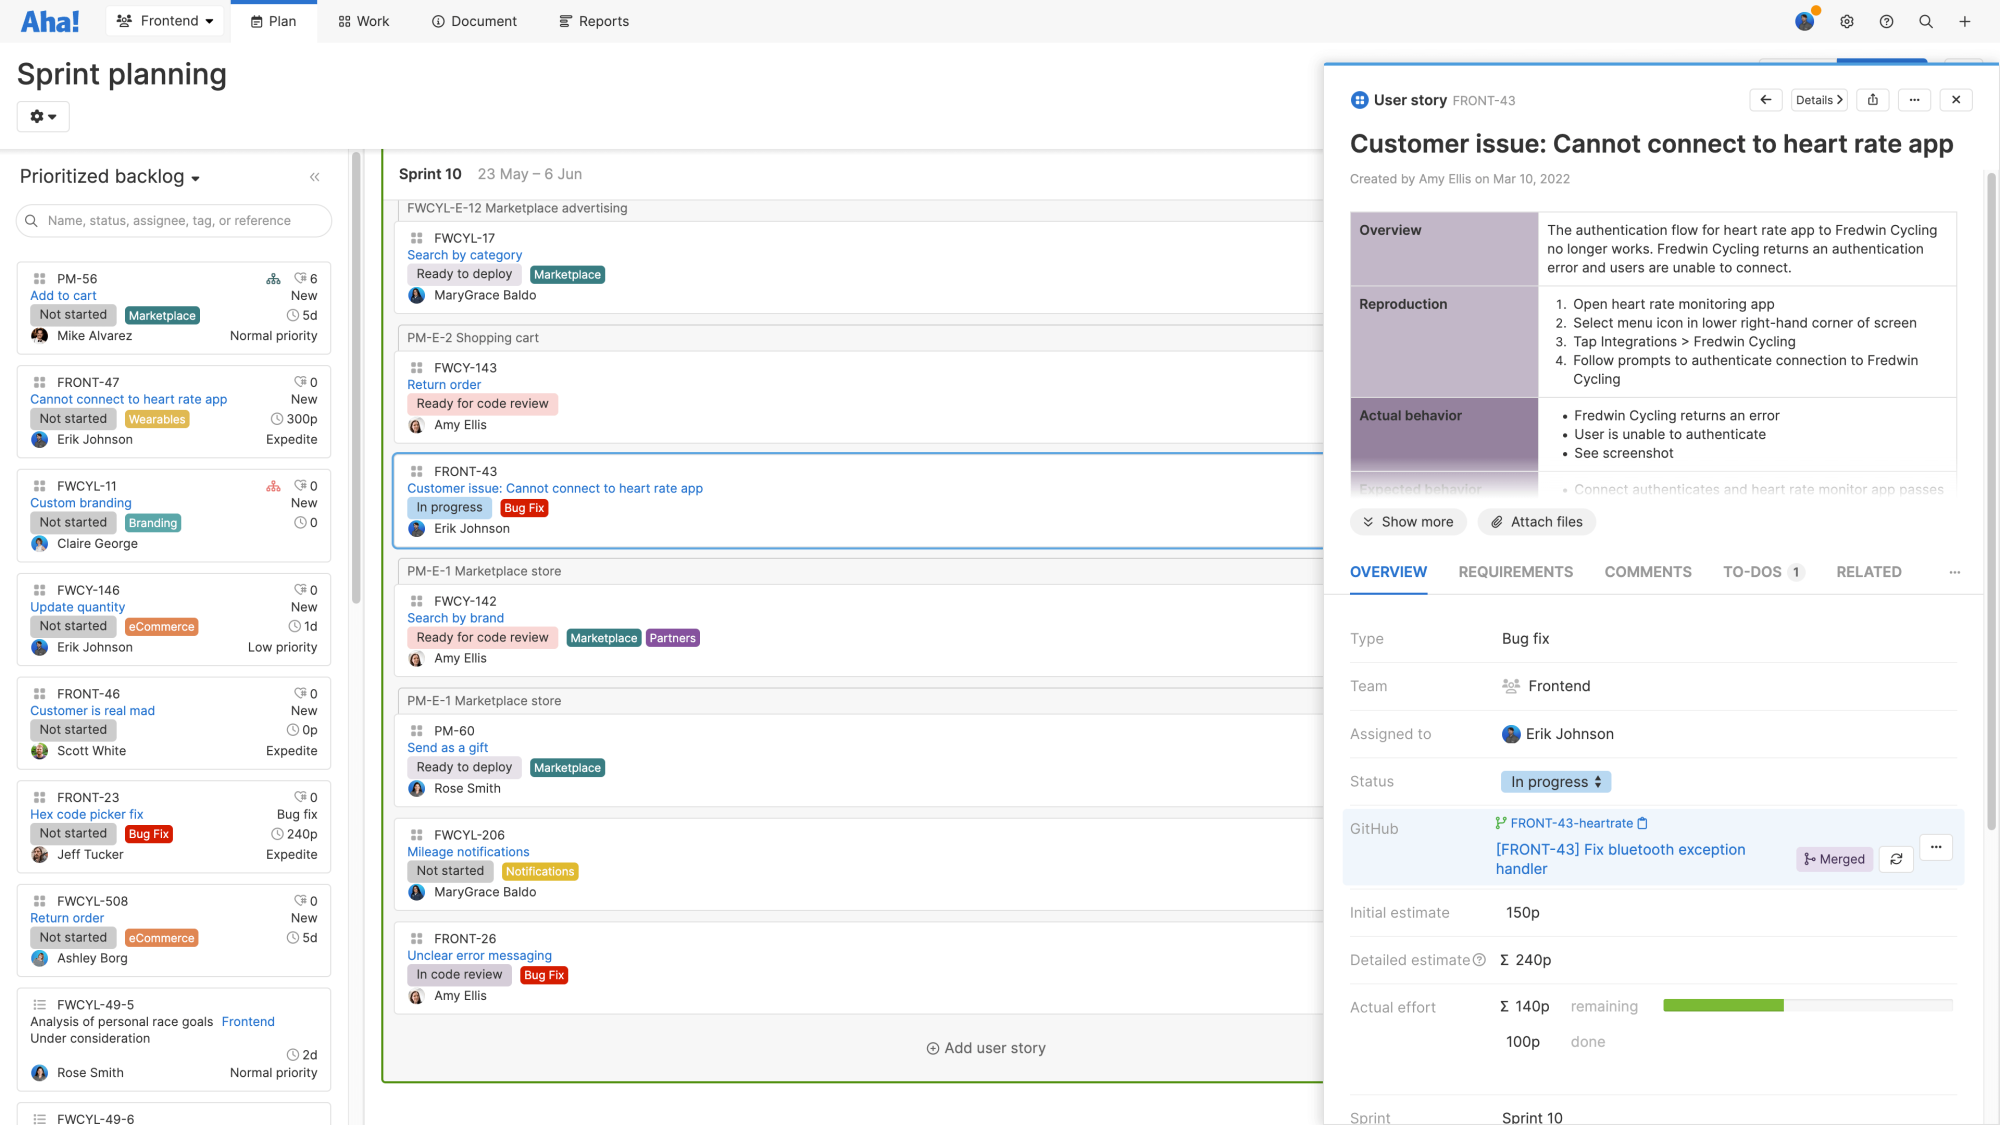 Feature drawer open in front of the sprint planning page, showing the linked GitHub pull request.